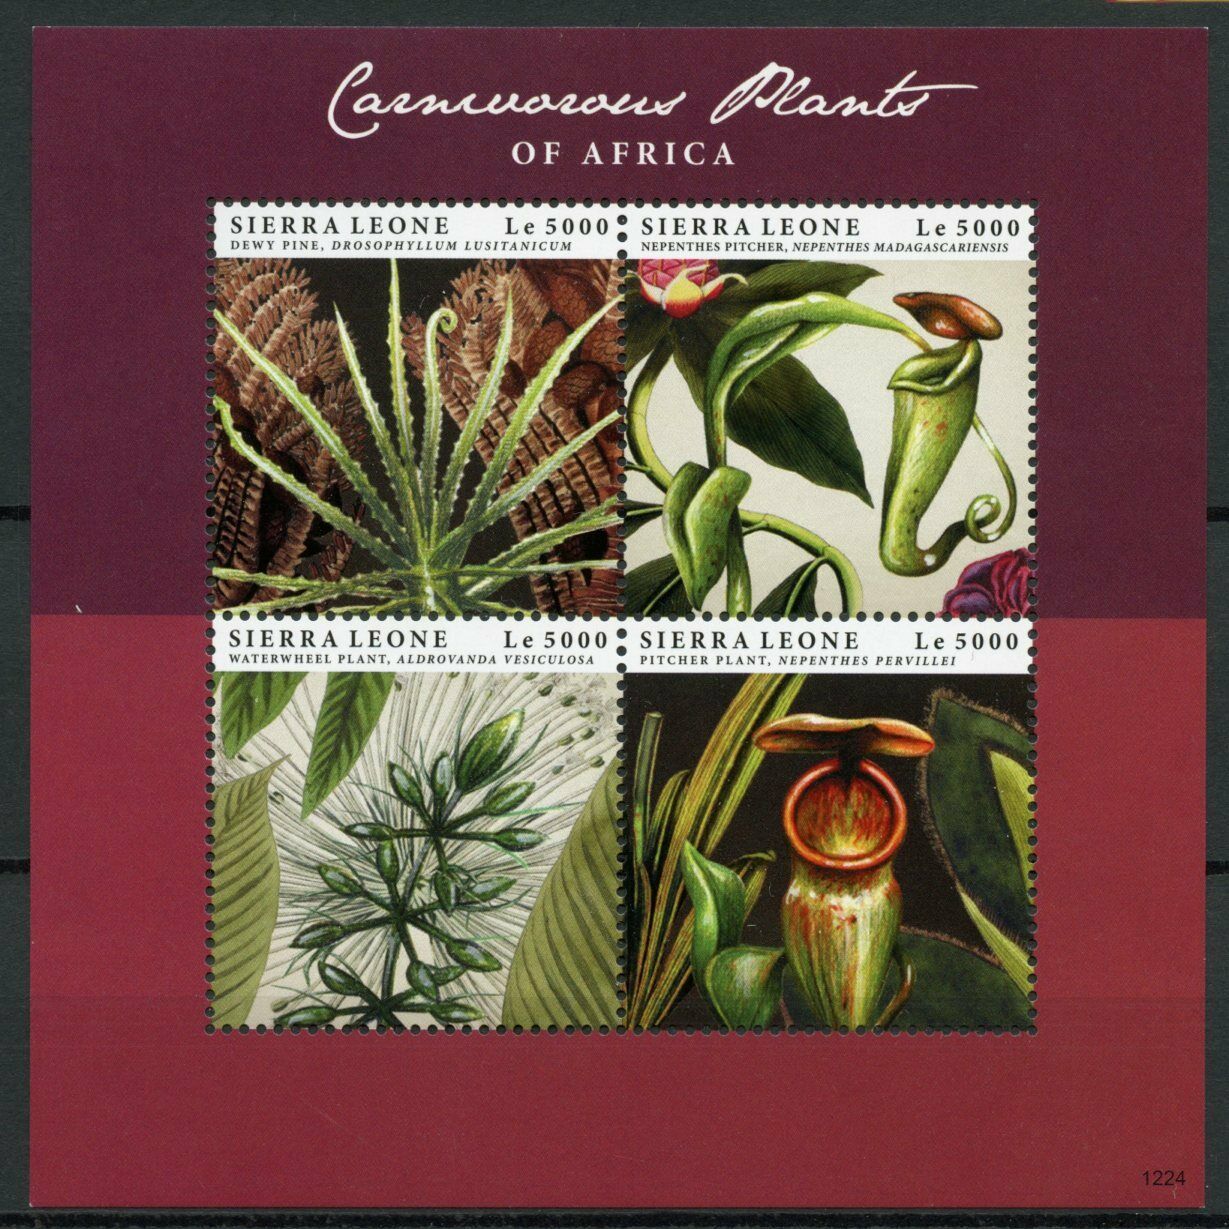 Sierra Leone Stamps 2012 MNH Carnivorous Plants of Africa Dewy Pine 4v M/S